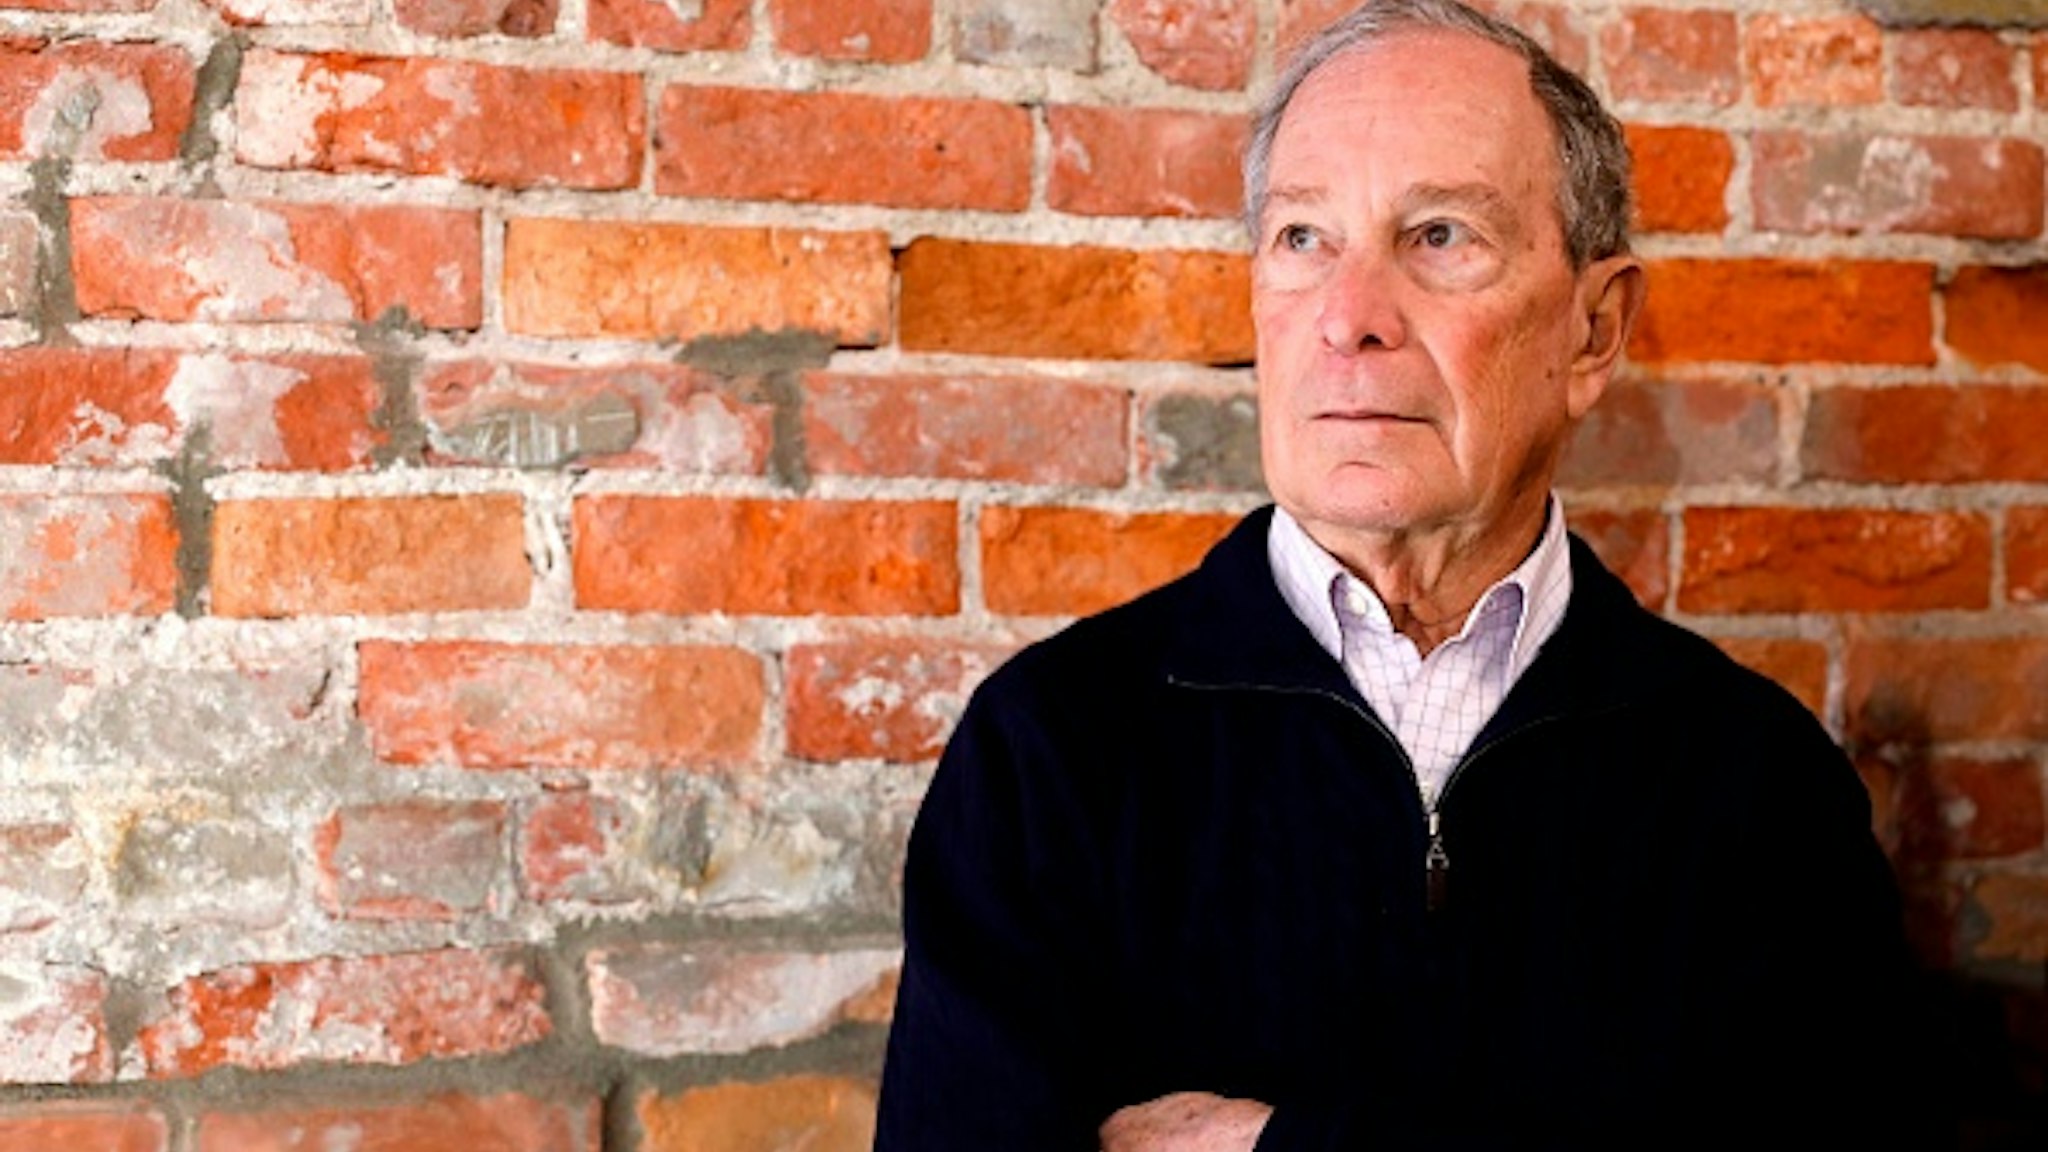 2020 Democratic presidential hopeful and former New York Mayor Michael Bloomberg poses for a photo during an event to open a campaign office at Eastern Market in Detroit, Michigan, on December 21, 2019.